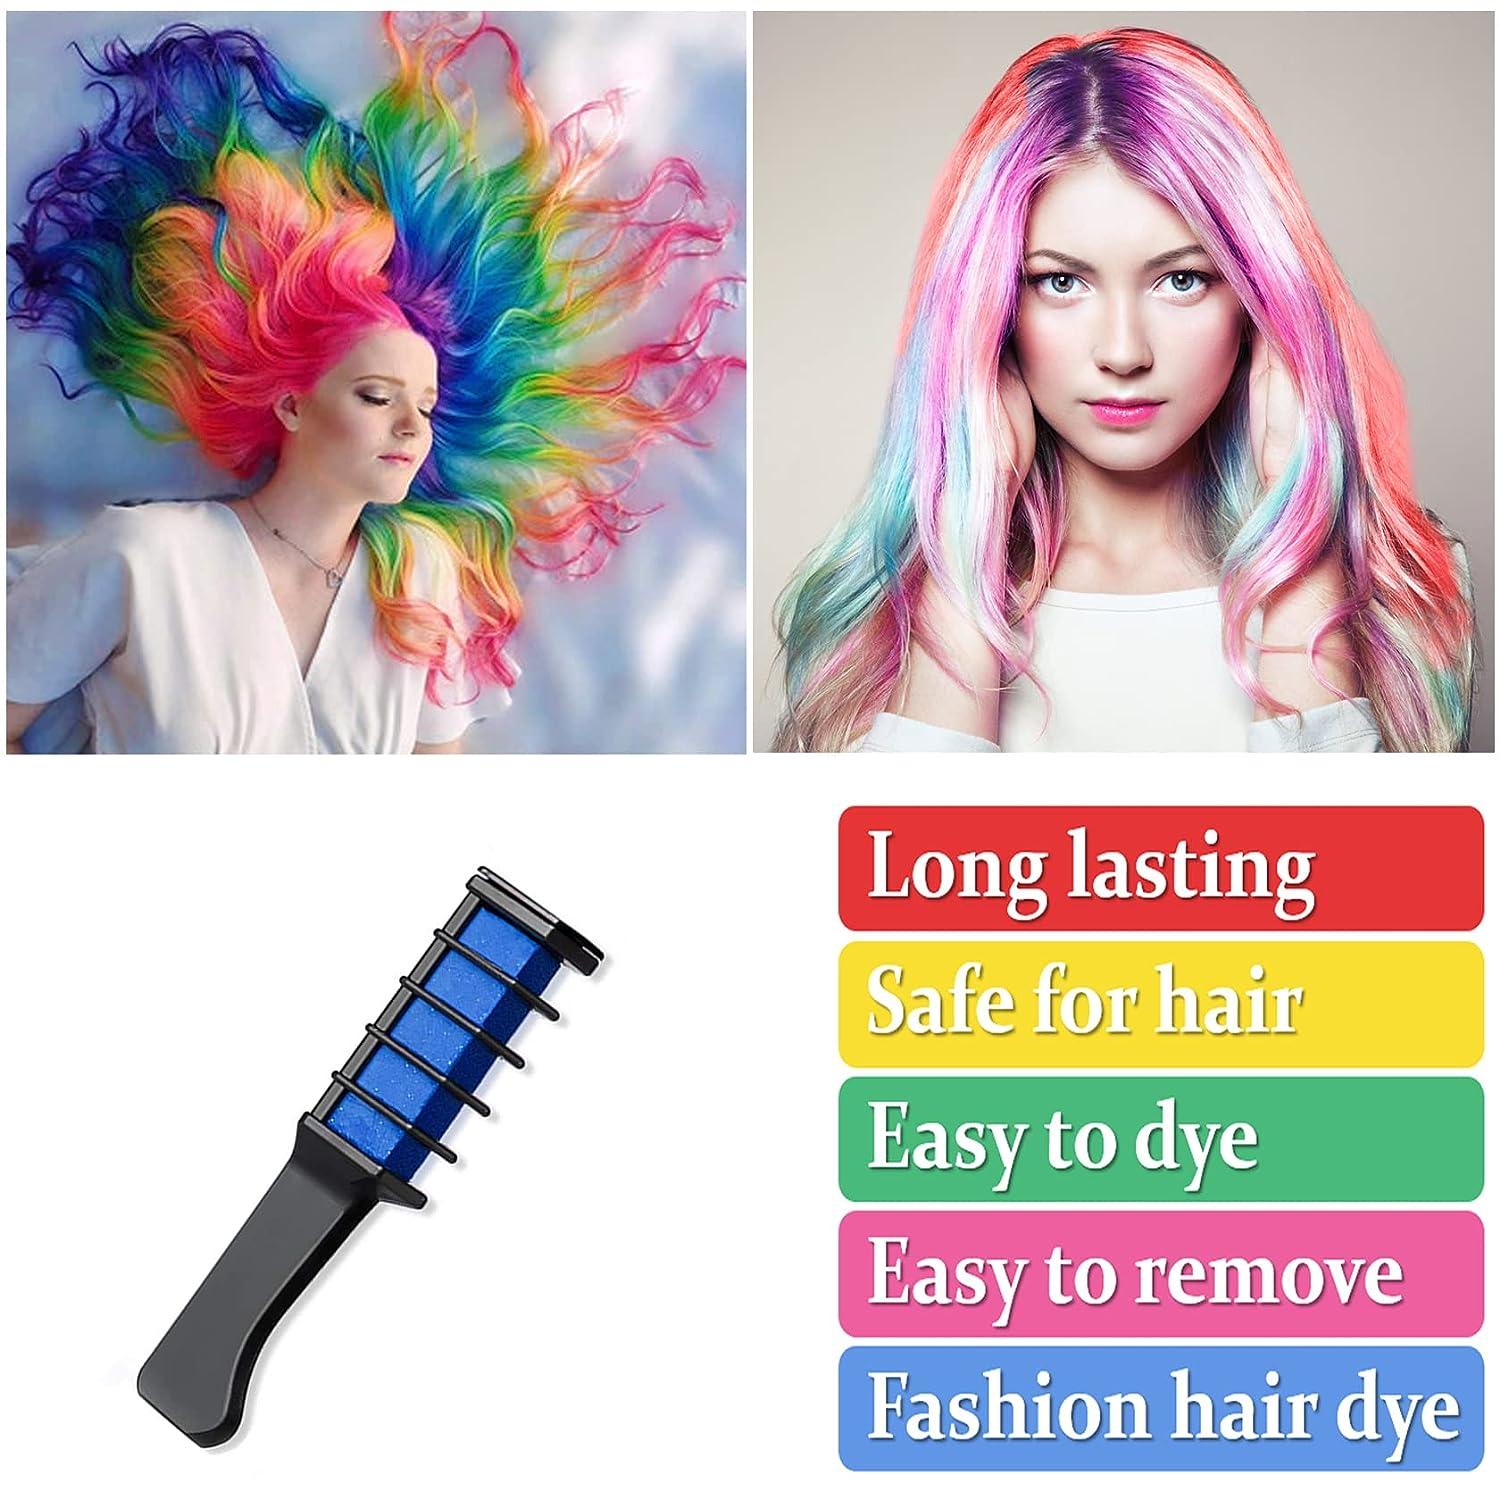 10 Color Hair Chalk for Girls Temporary Hair Color Dye for Kids,Washable  Hair Chalk Comb,Gifts for Girls Age 8-12,Best Creative Gifts for Children's